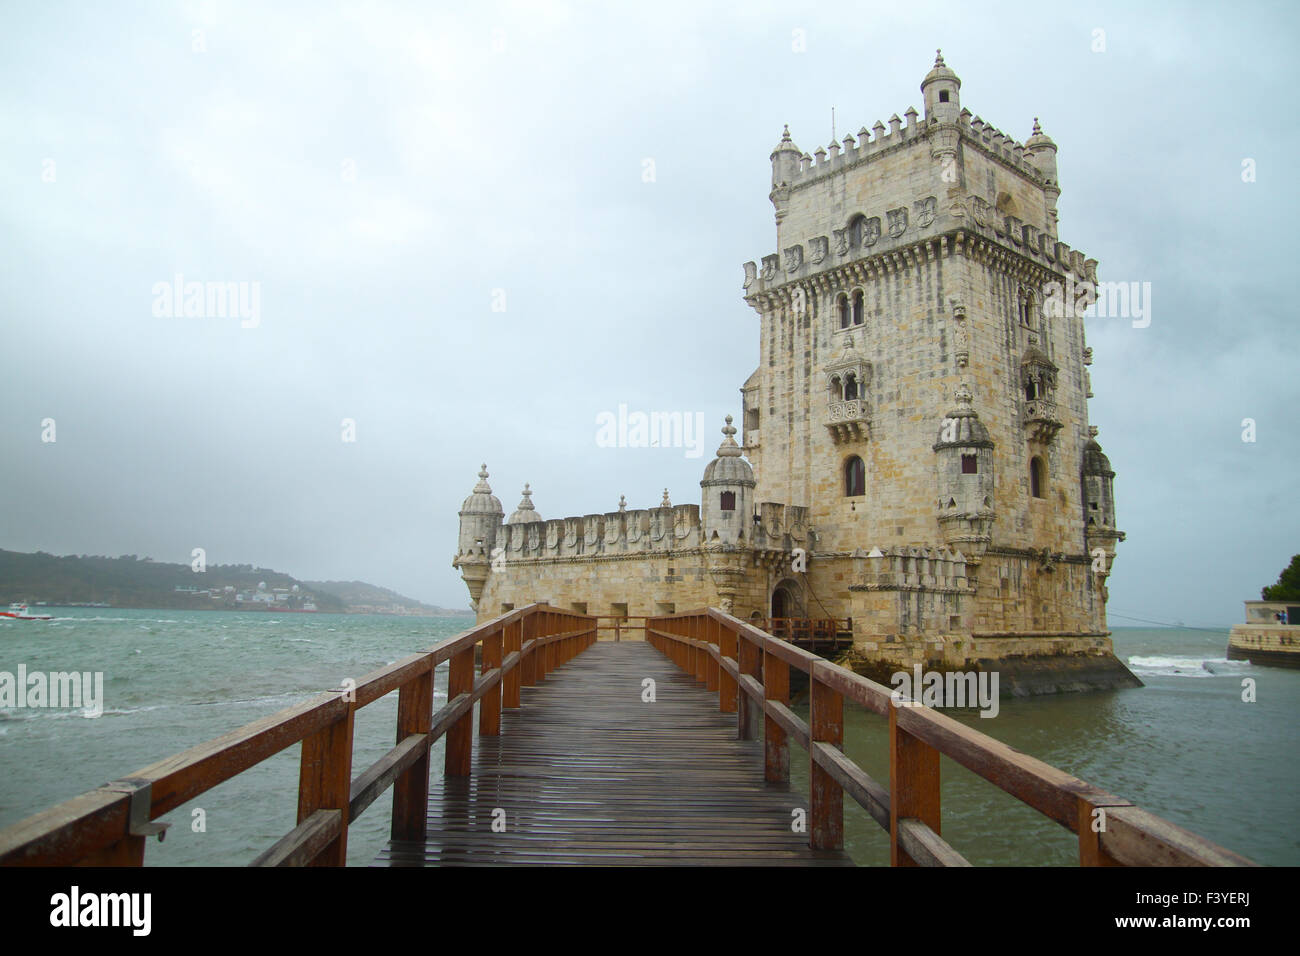 Lisbon, Portugal, 5 October, 2015. Entrance to the Belém Tower that located on the banks of the mouth of the Tagus river. The tower is  a UNESCO World Heritage Site. Credit: David Mbiyu/ Alamy Live News Stock Photo